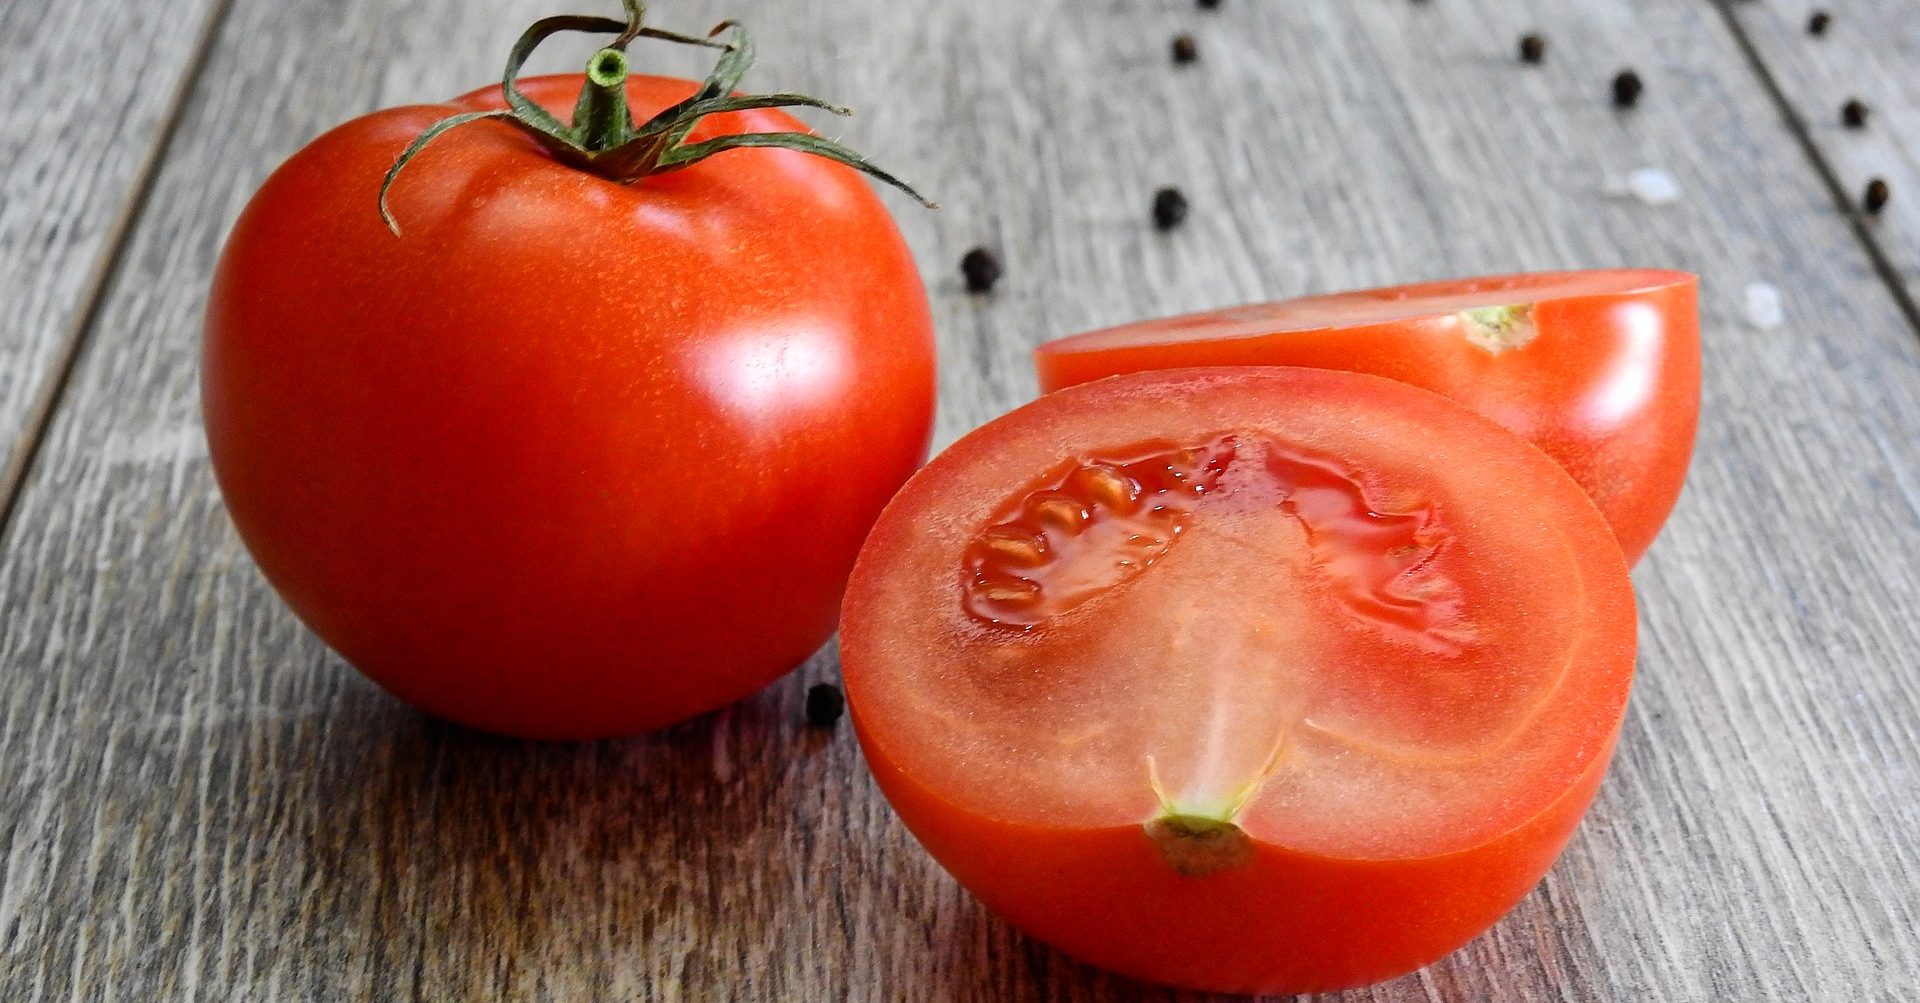 EU imposes payment to Mexican tomato producers